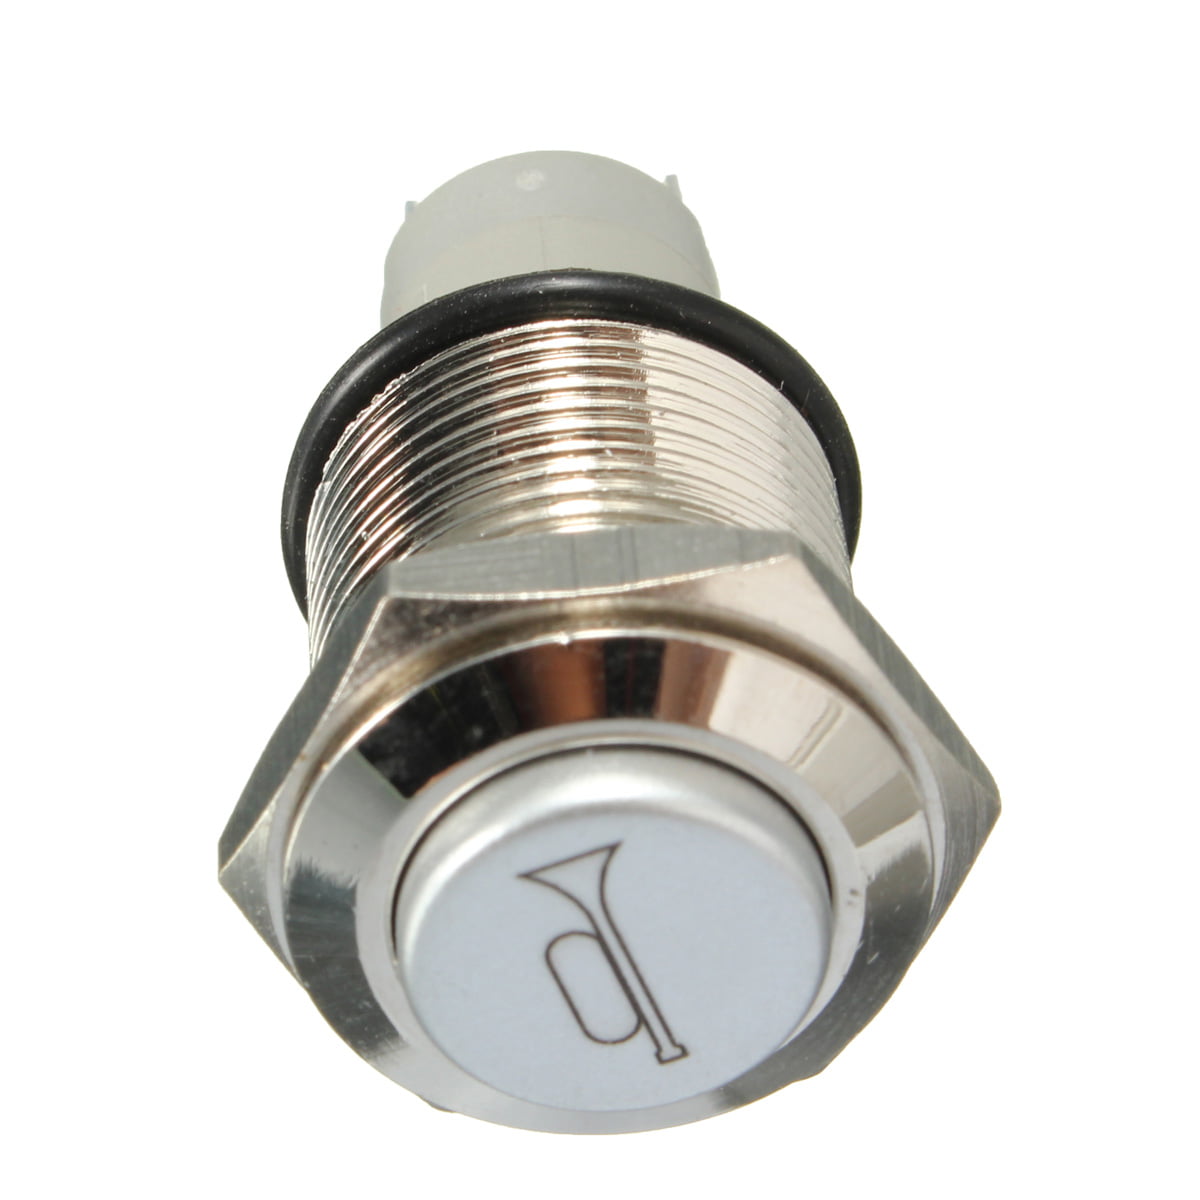 Car Metal Push Button Boat Horn Starter Momentary Switch 12V 16mm For Boat Track